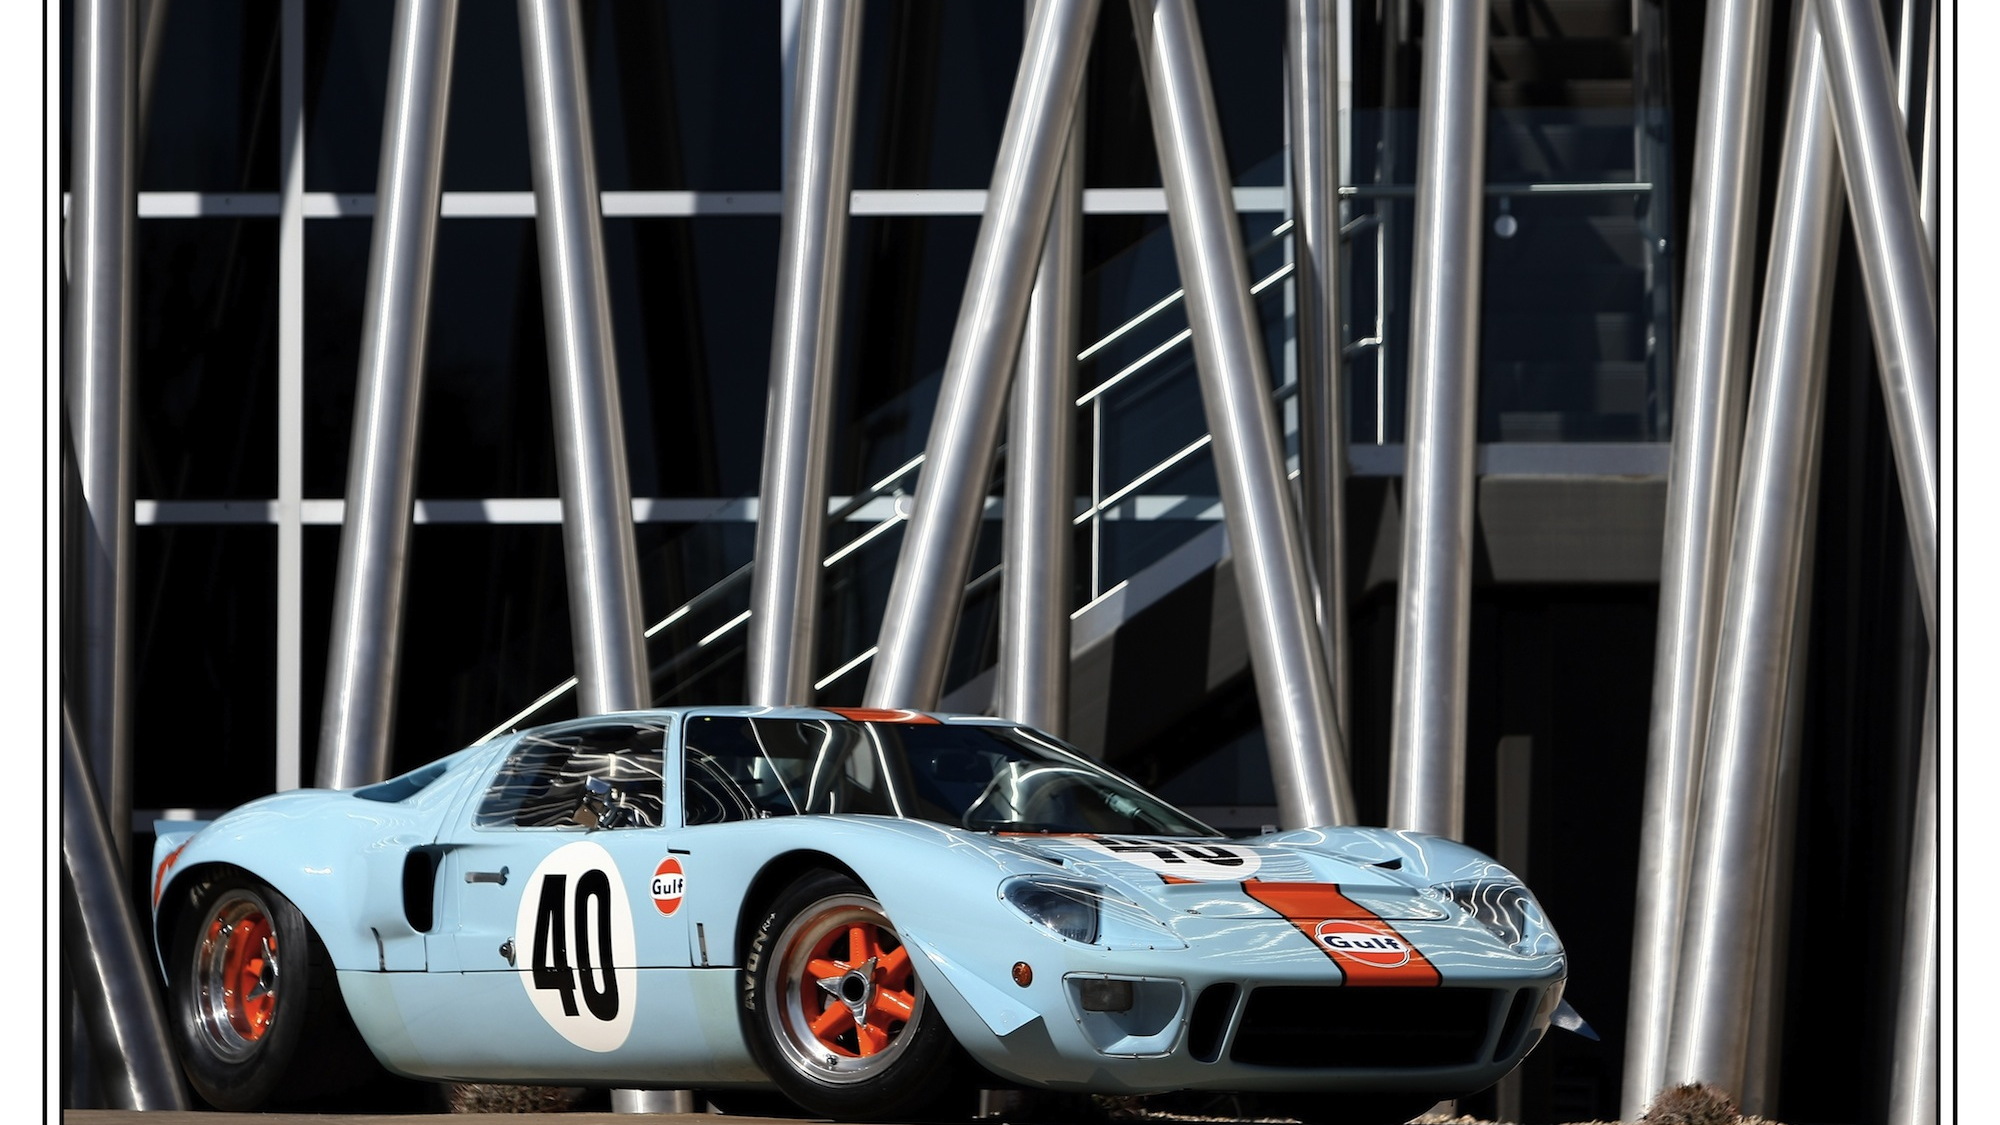 1968 Gulf/Mirage Lightweight Racing Car. Photo courtesy RM Auctions.